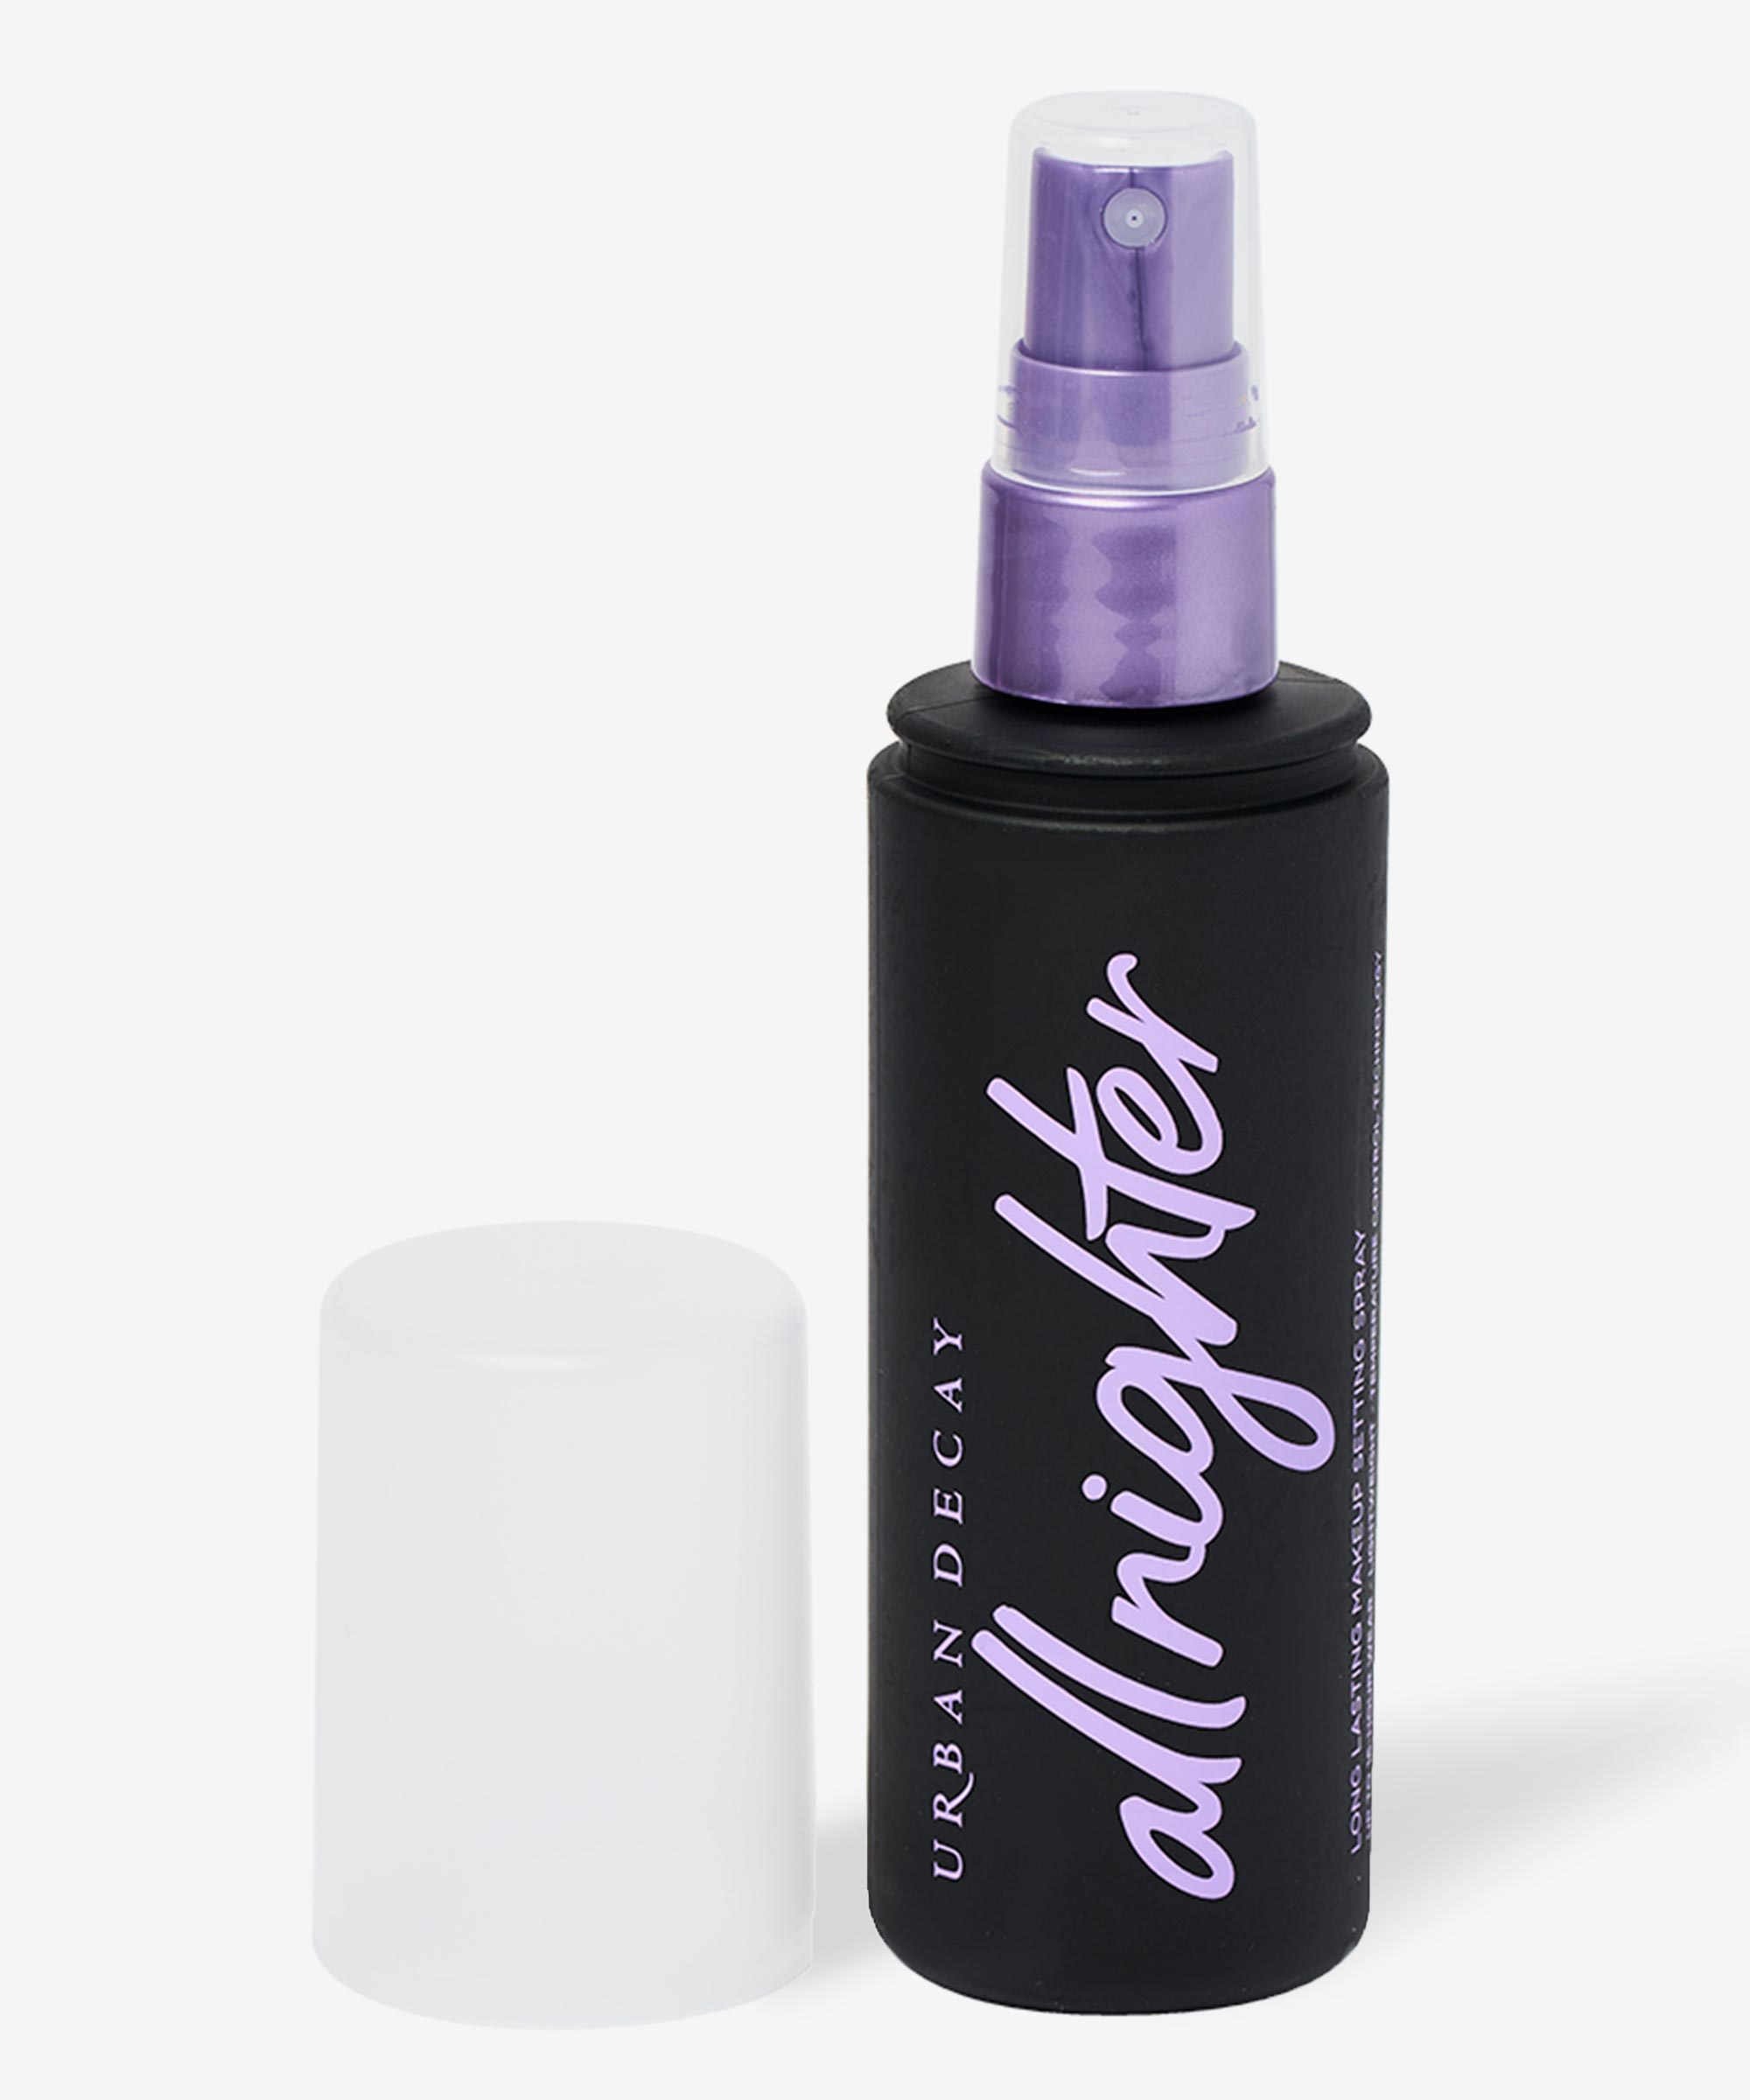 indre Mathis dråbe Urban Decay All Nighter Long Lasting Makeup Setting Spray at BEAUTY BAY